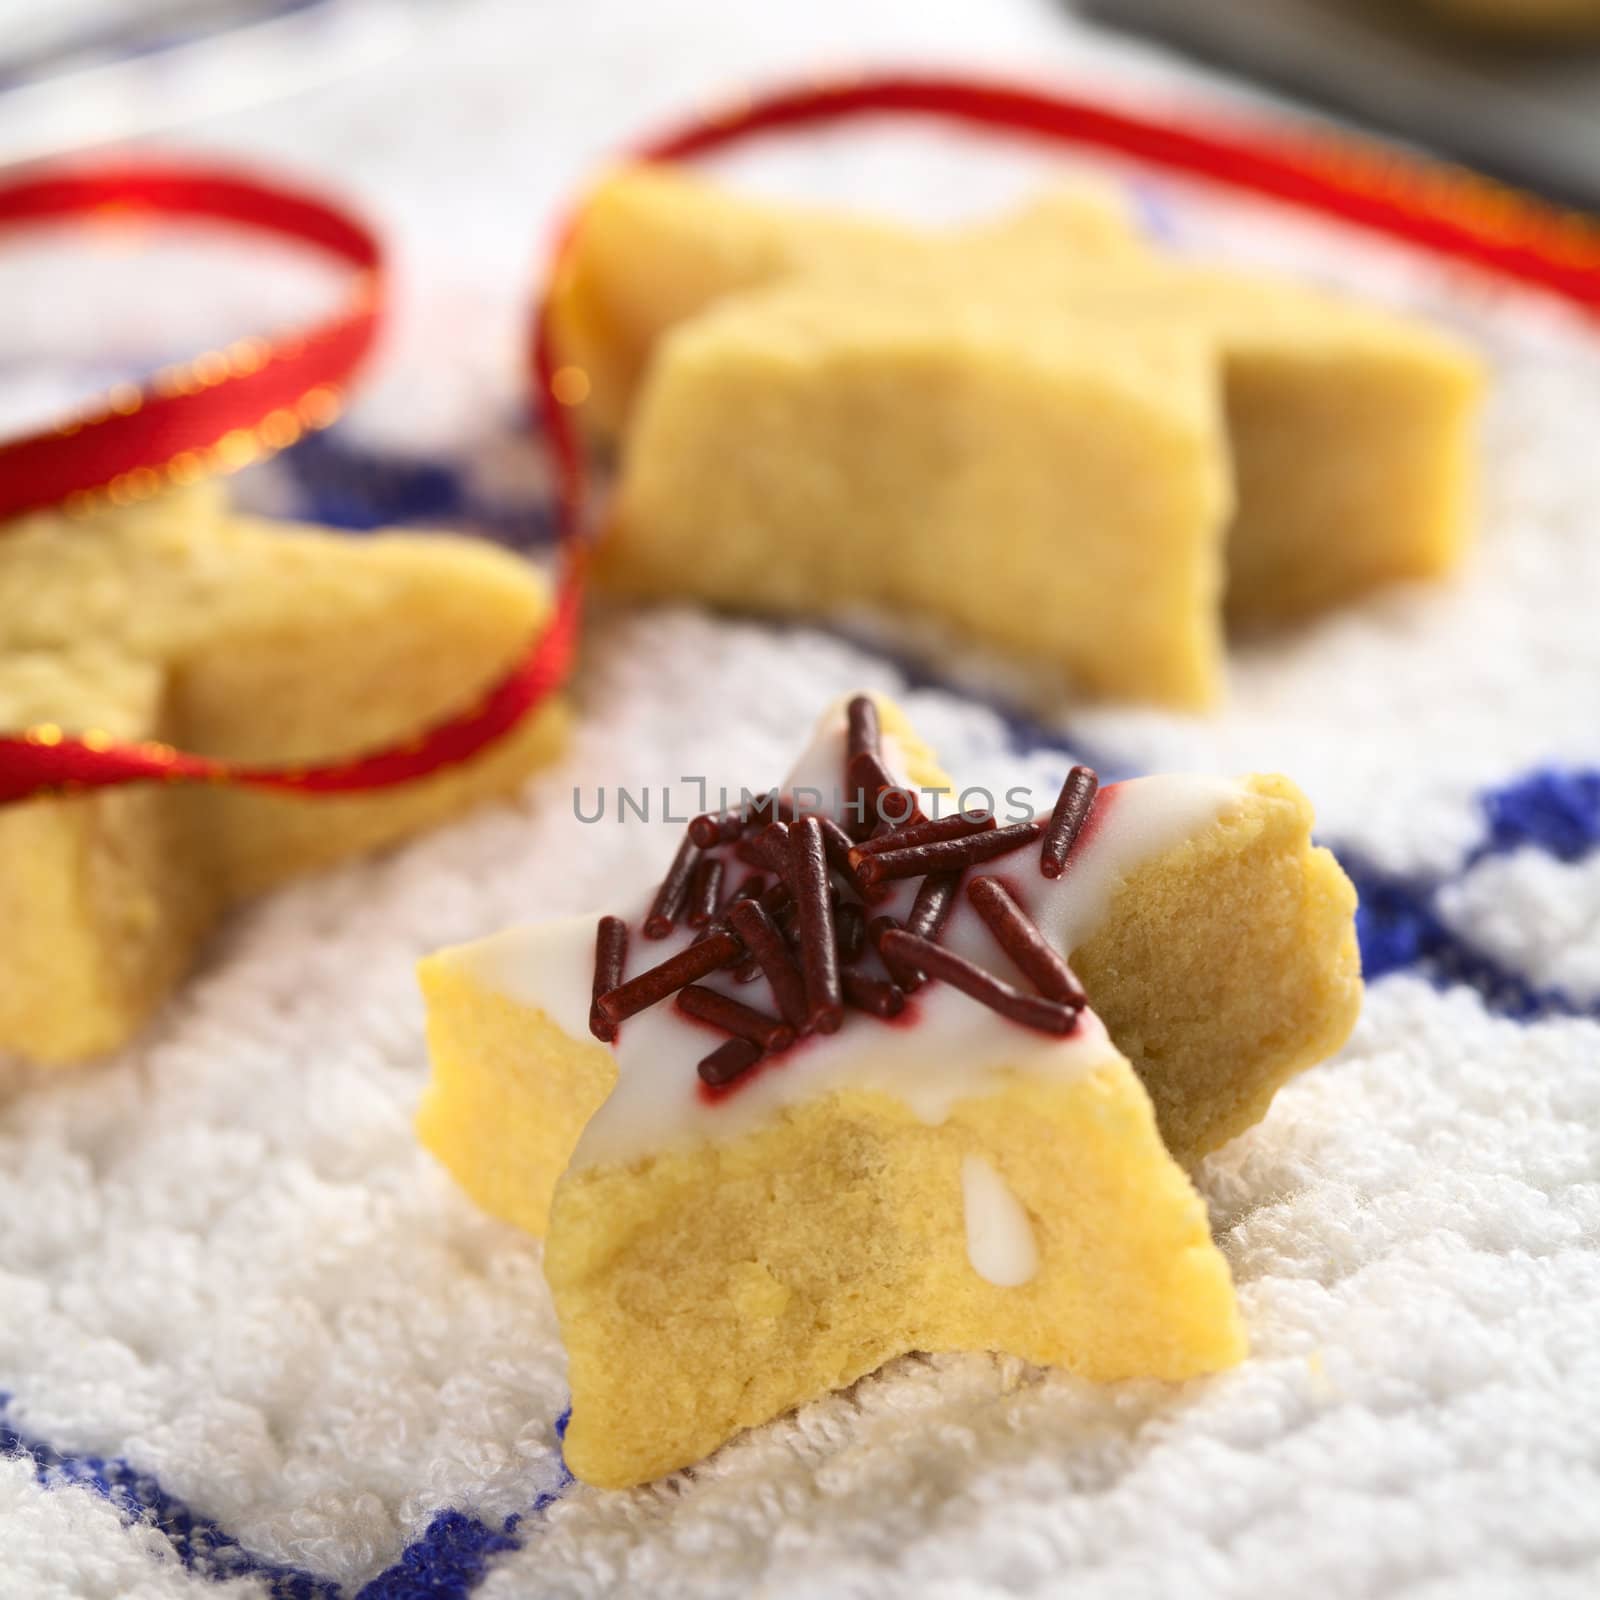 Star Shaped Cookie with Chocolate Sprinkles by ildi